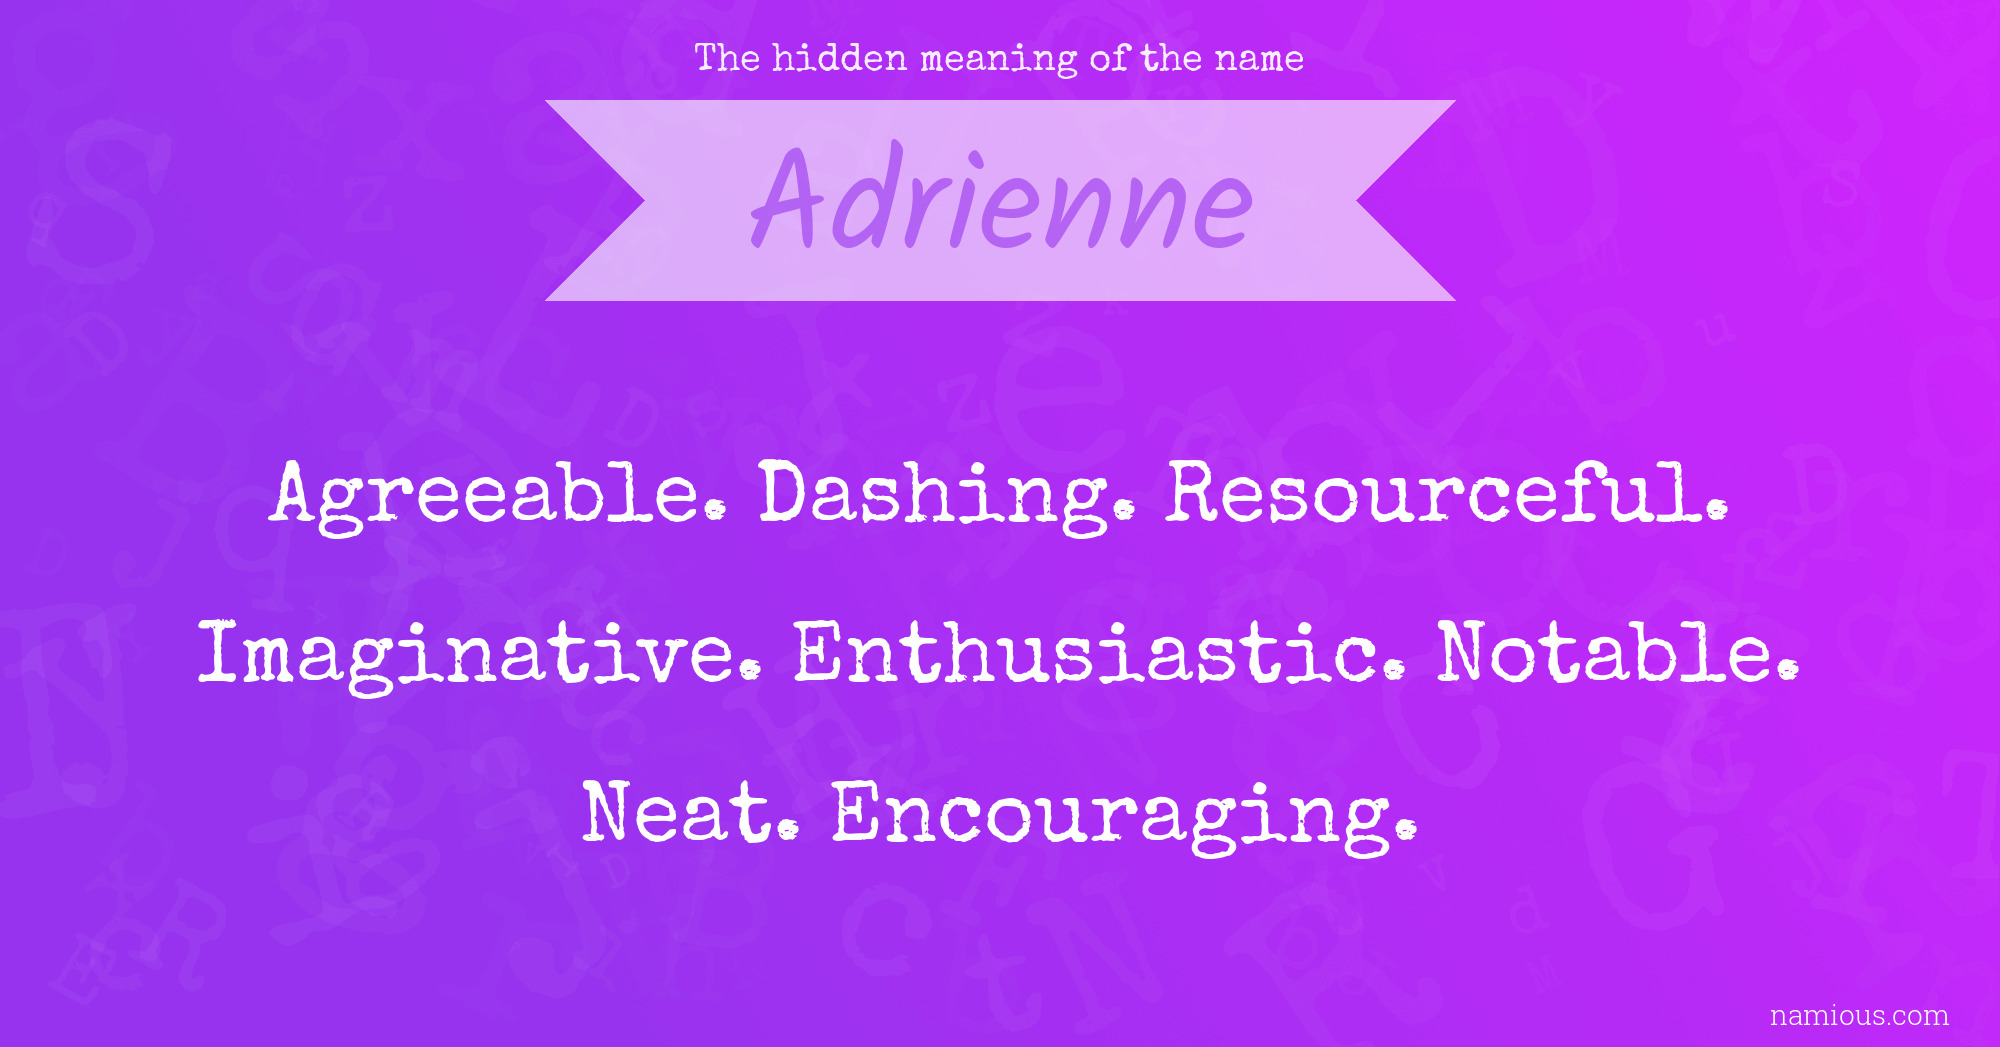 The hidden meaning of the name Adrienne